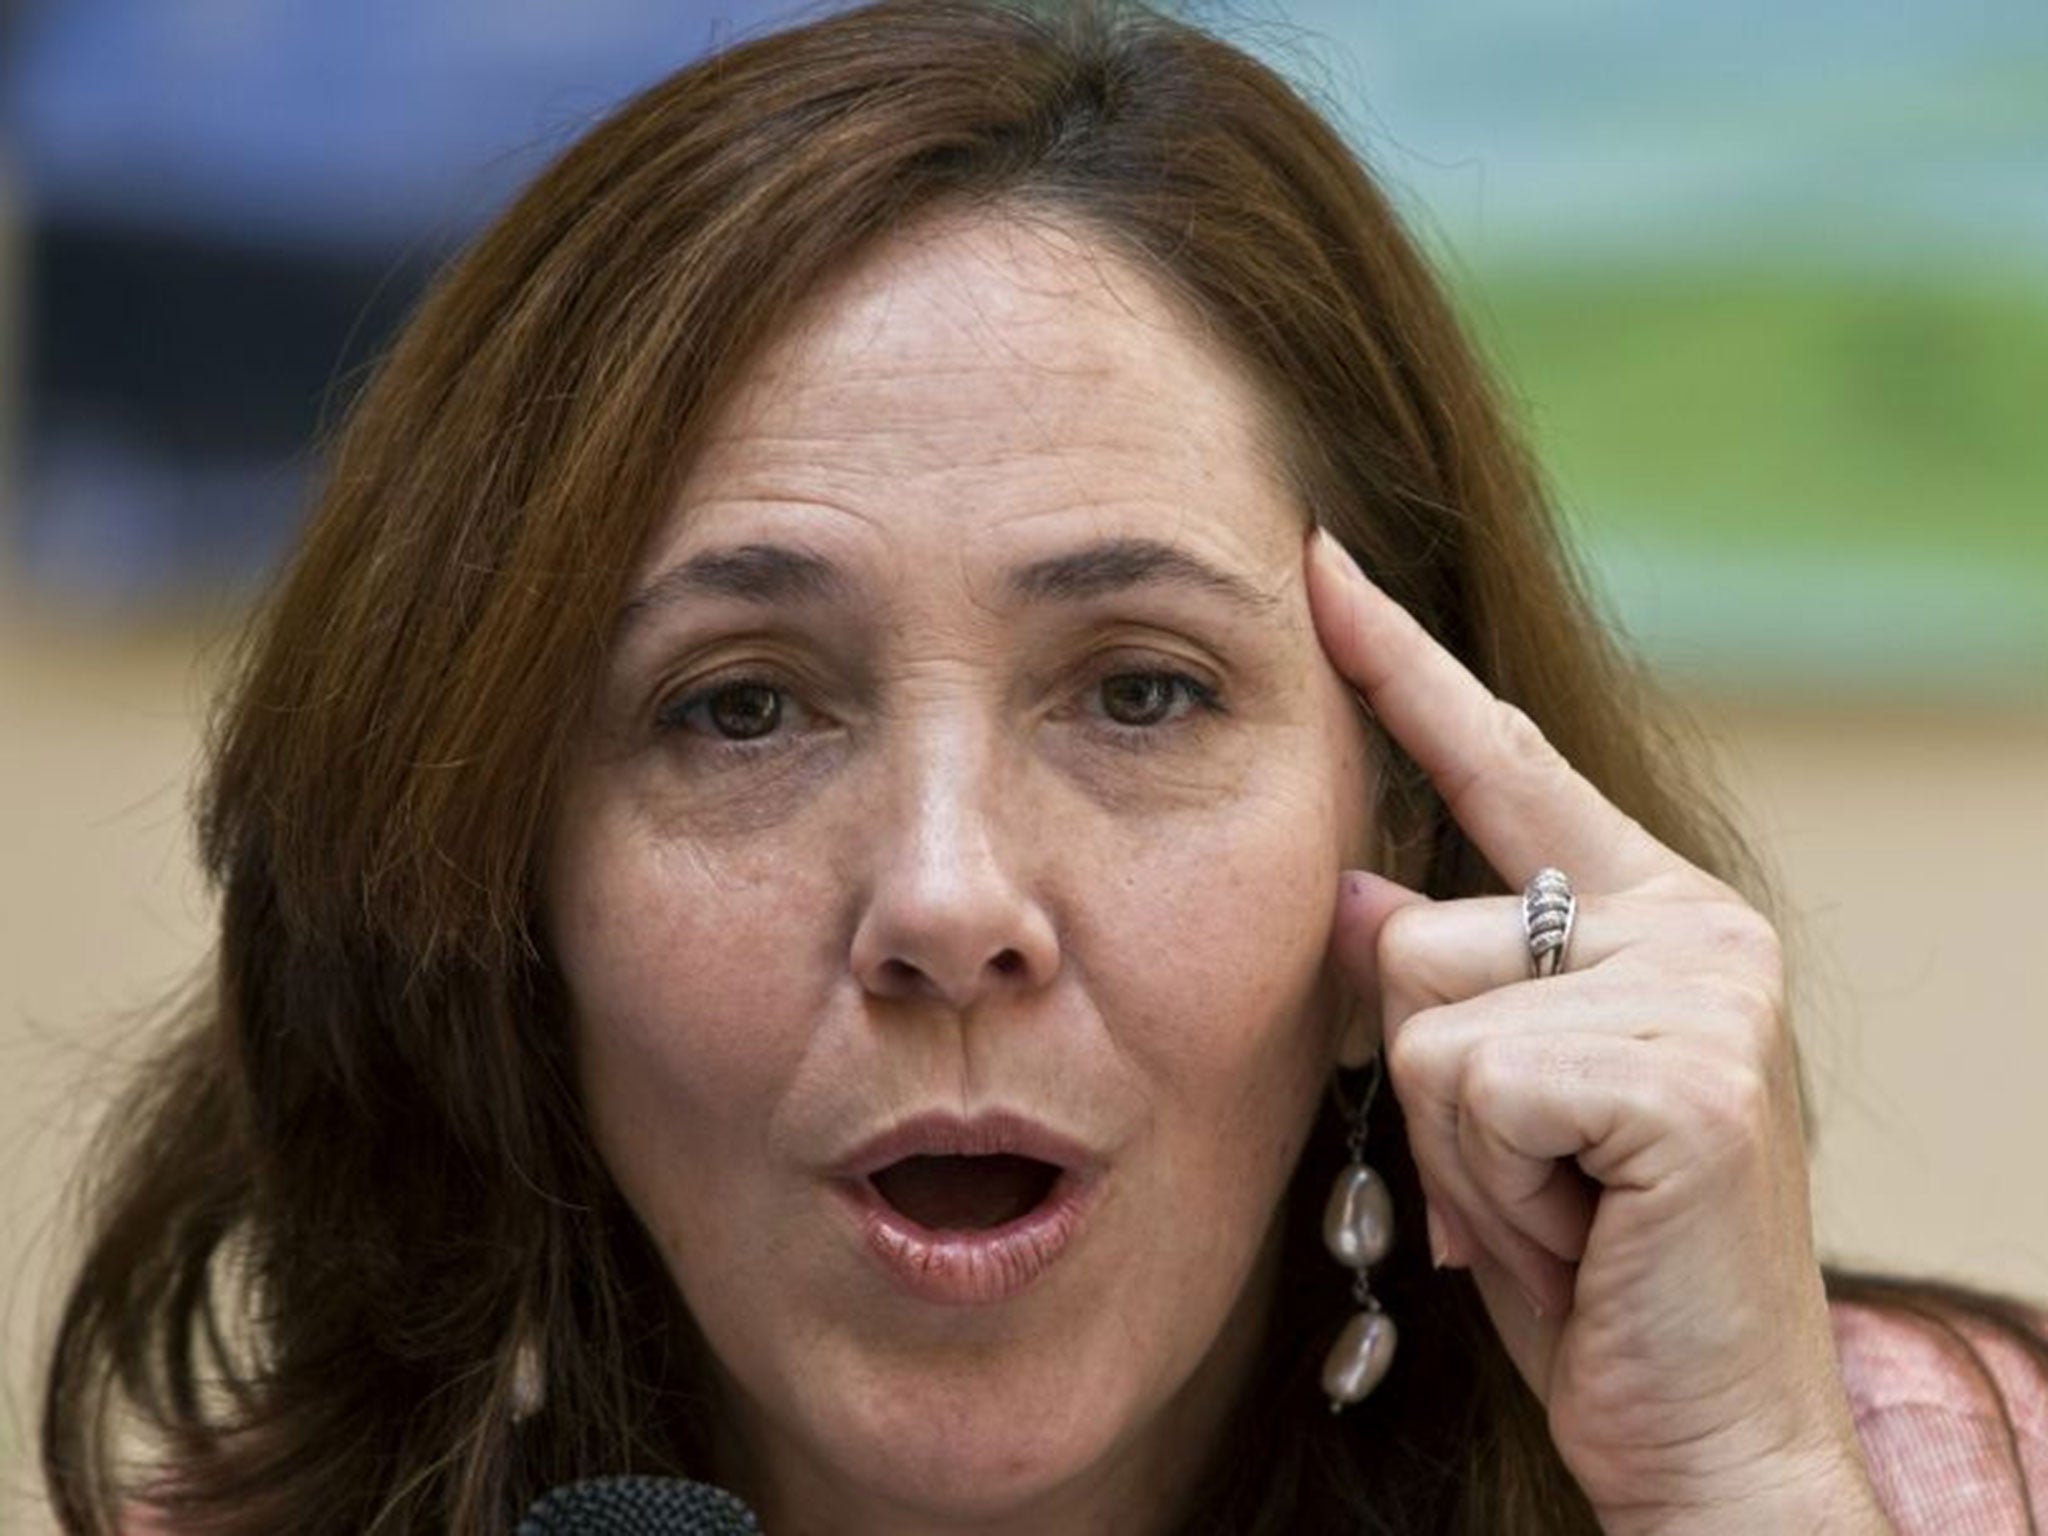 Mariela Castro has become the first person to vote against a bill in Cuba's National Assembly